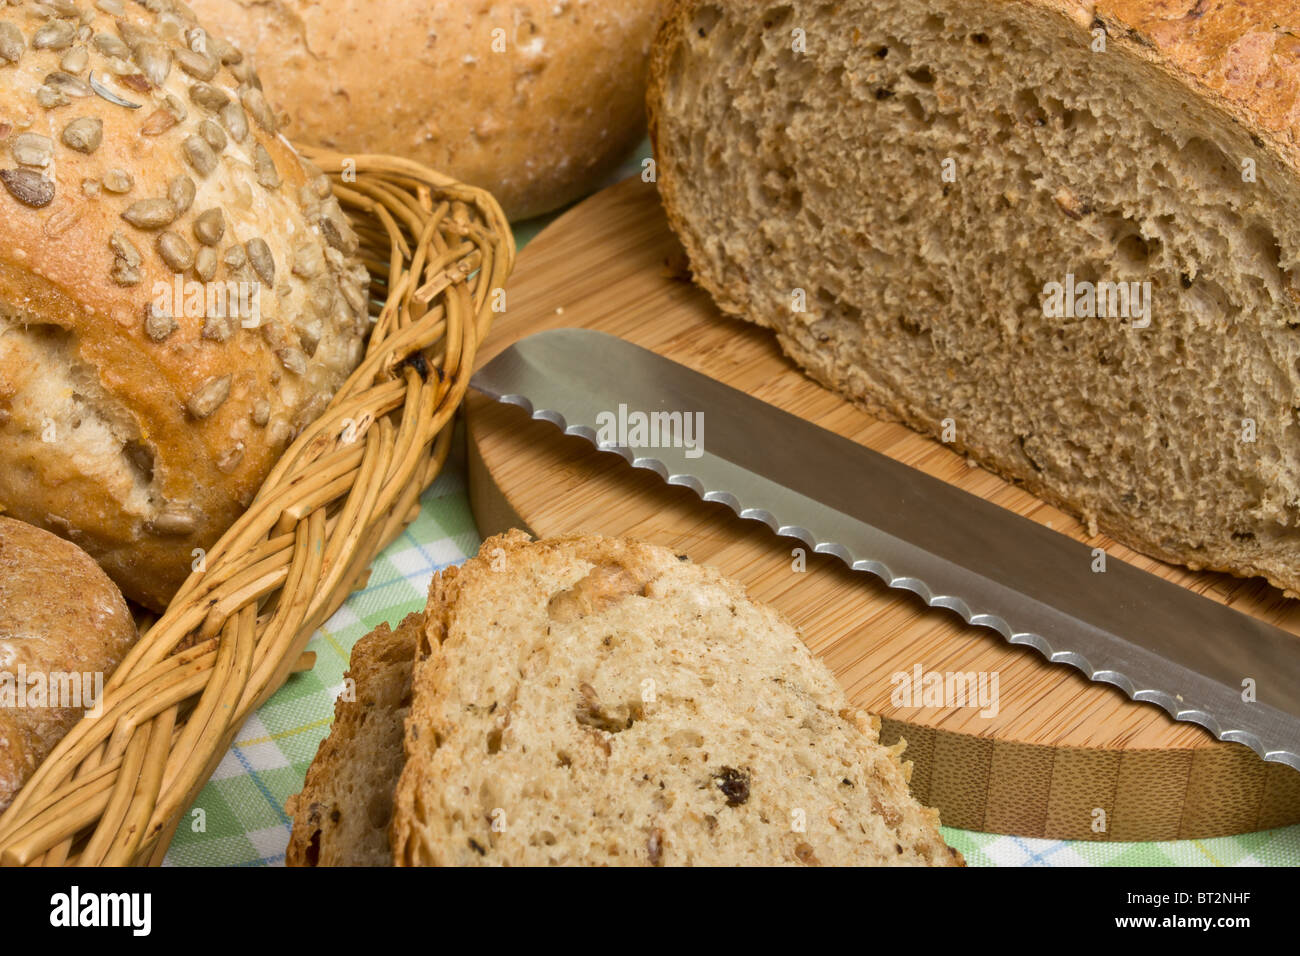 A selection of rustic organic handmade gourmet breads. Stock Photo